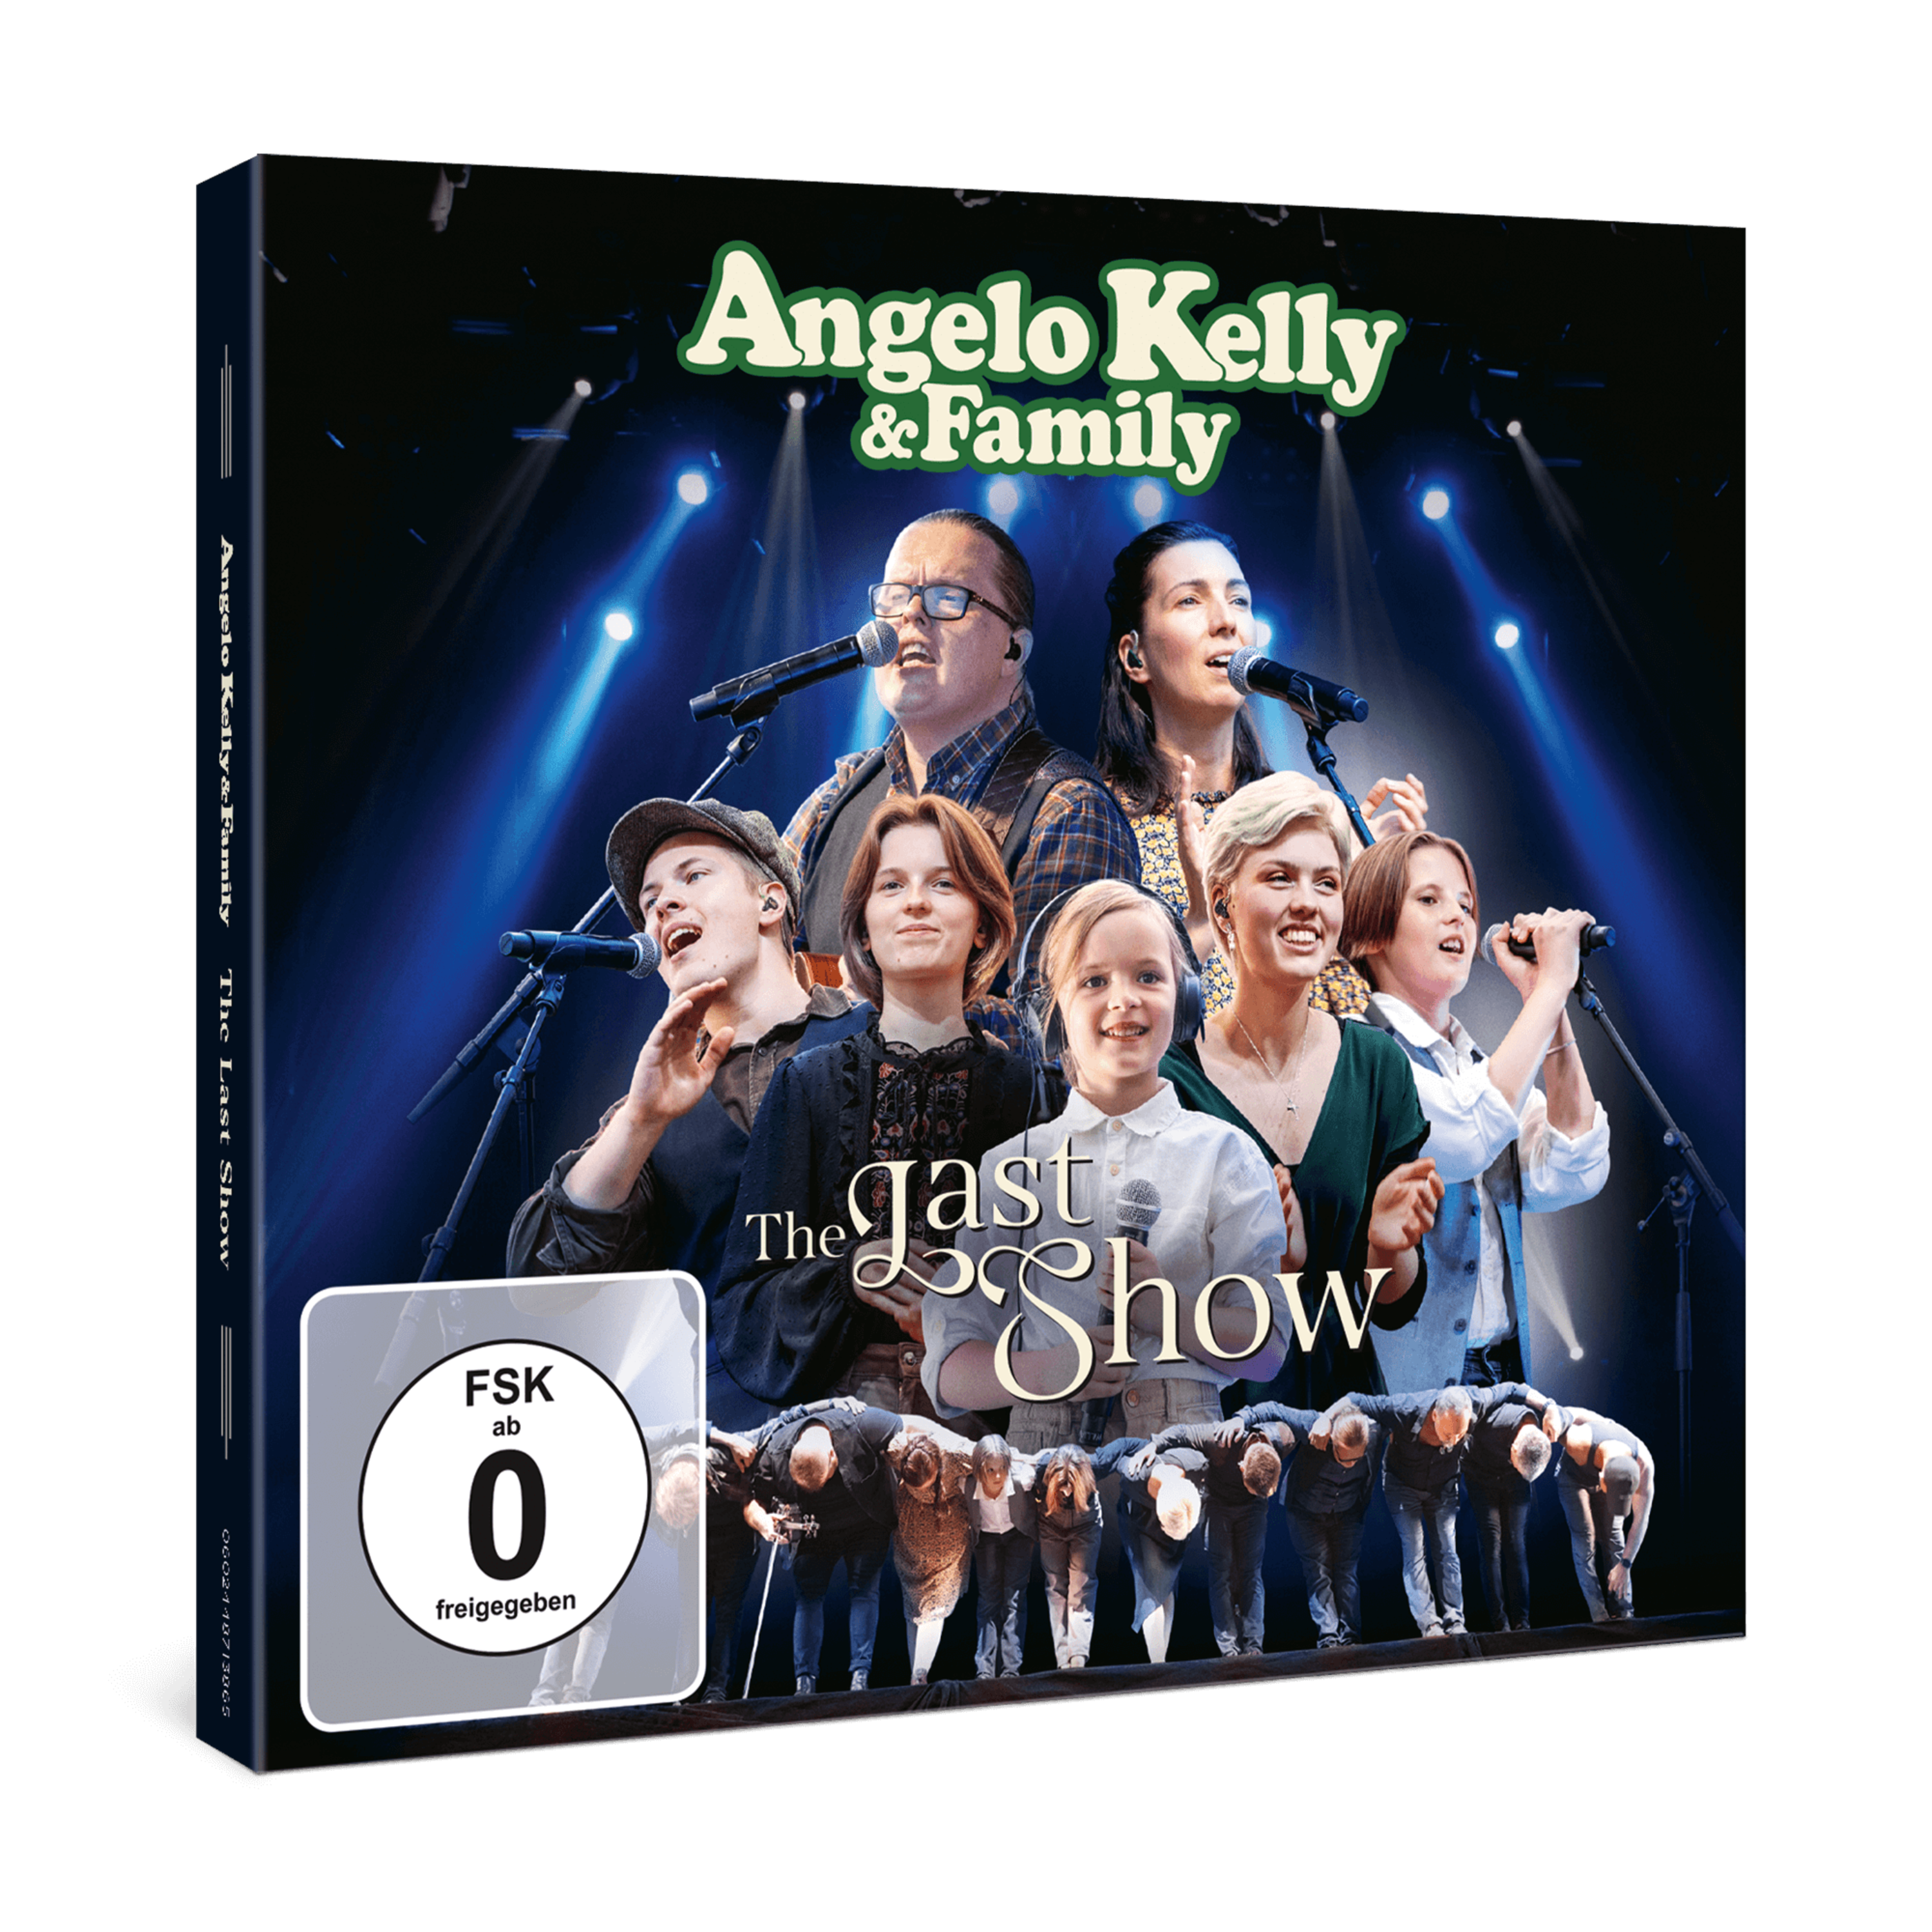 https://angelokelly.universal-music.de/assets/asset_300x300/Angelo-Kelly-Family-The-Last-Show-CD-500901-362195-7732585.png